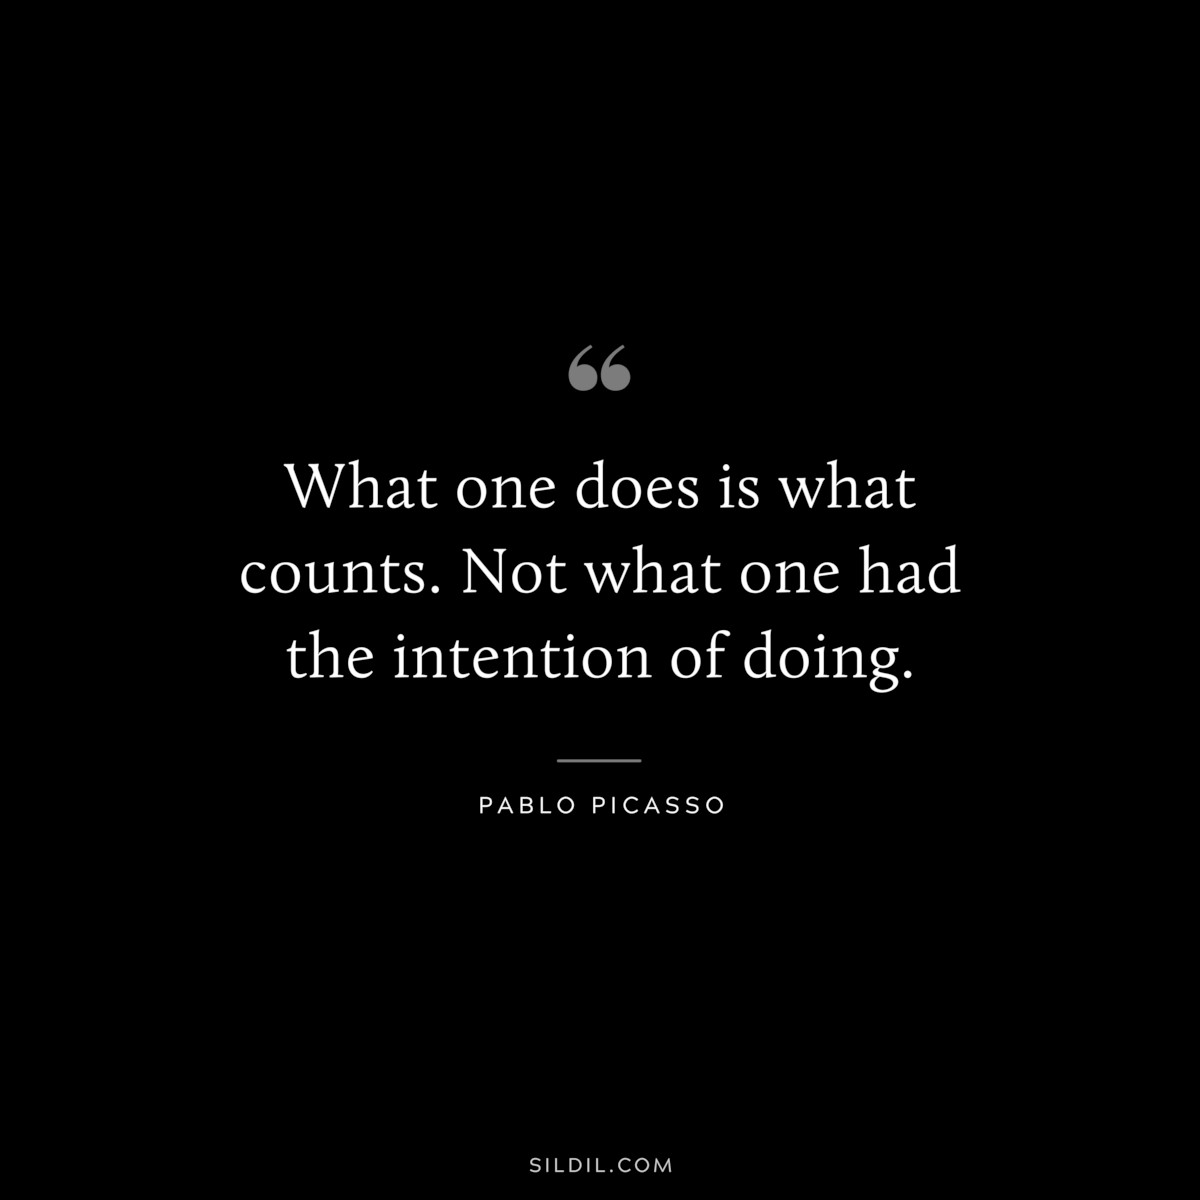 What one does is what counts. Not what one had the intention of doing. ― Pablo Picasso